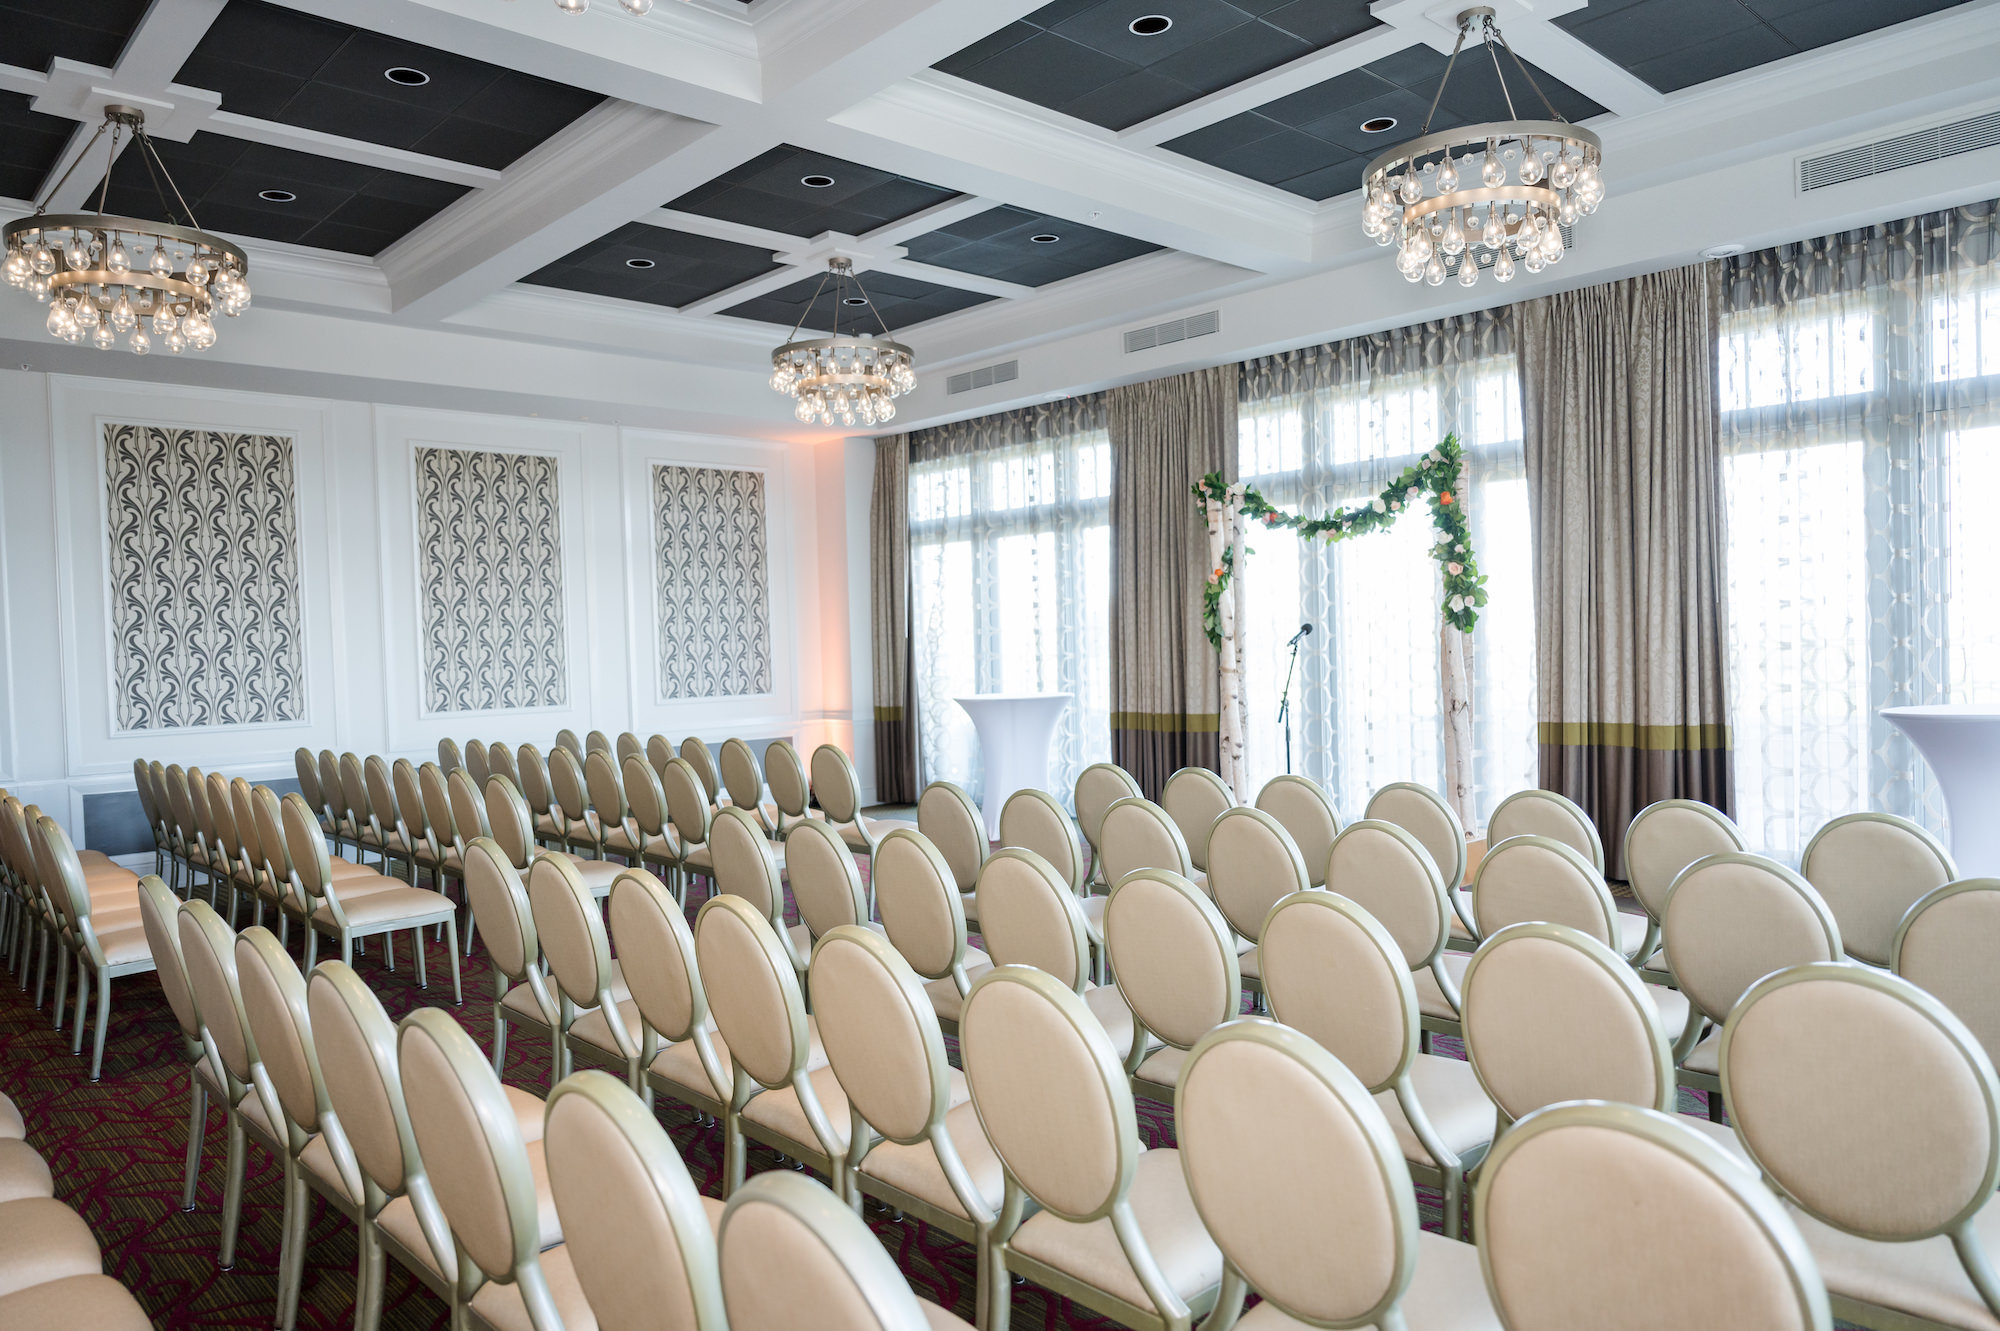 Indoor Wedding Ceremony with White Chairs and Greenery Arch | St. Pete Wedding Venue The Birchwood